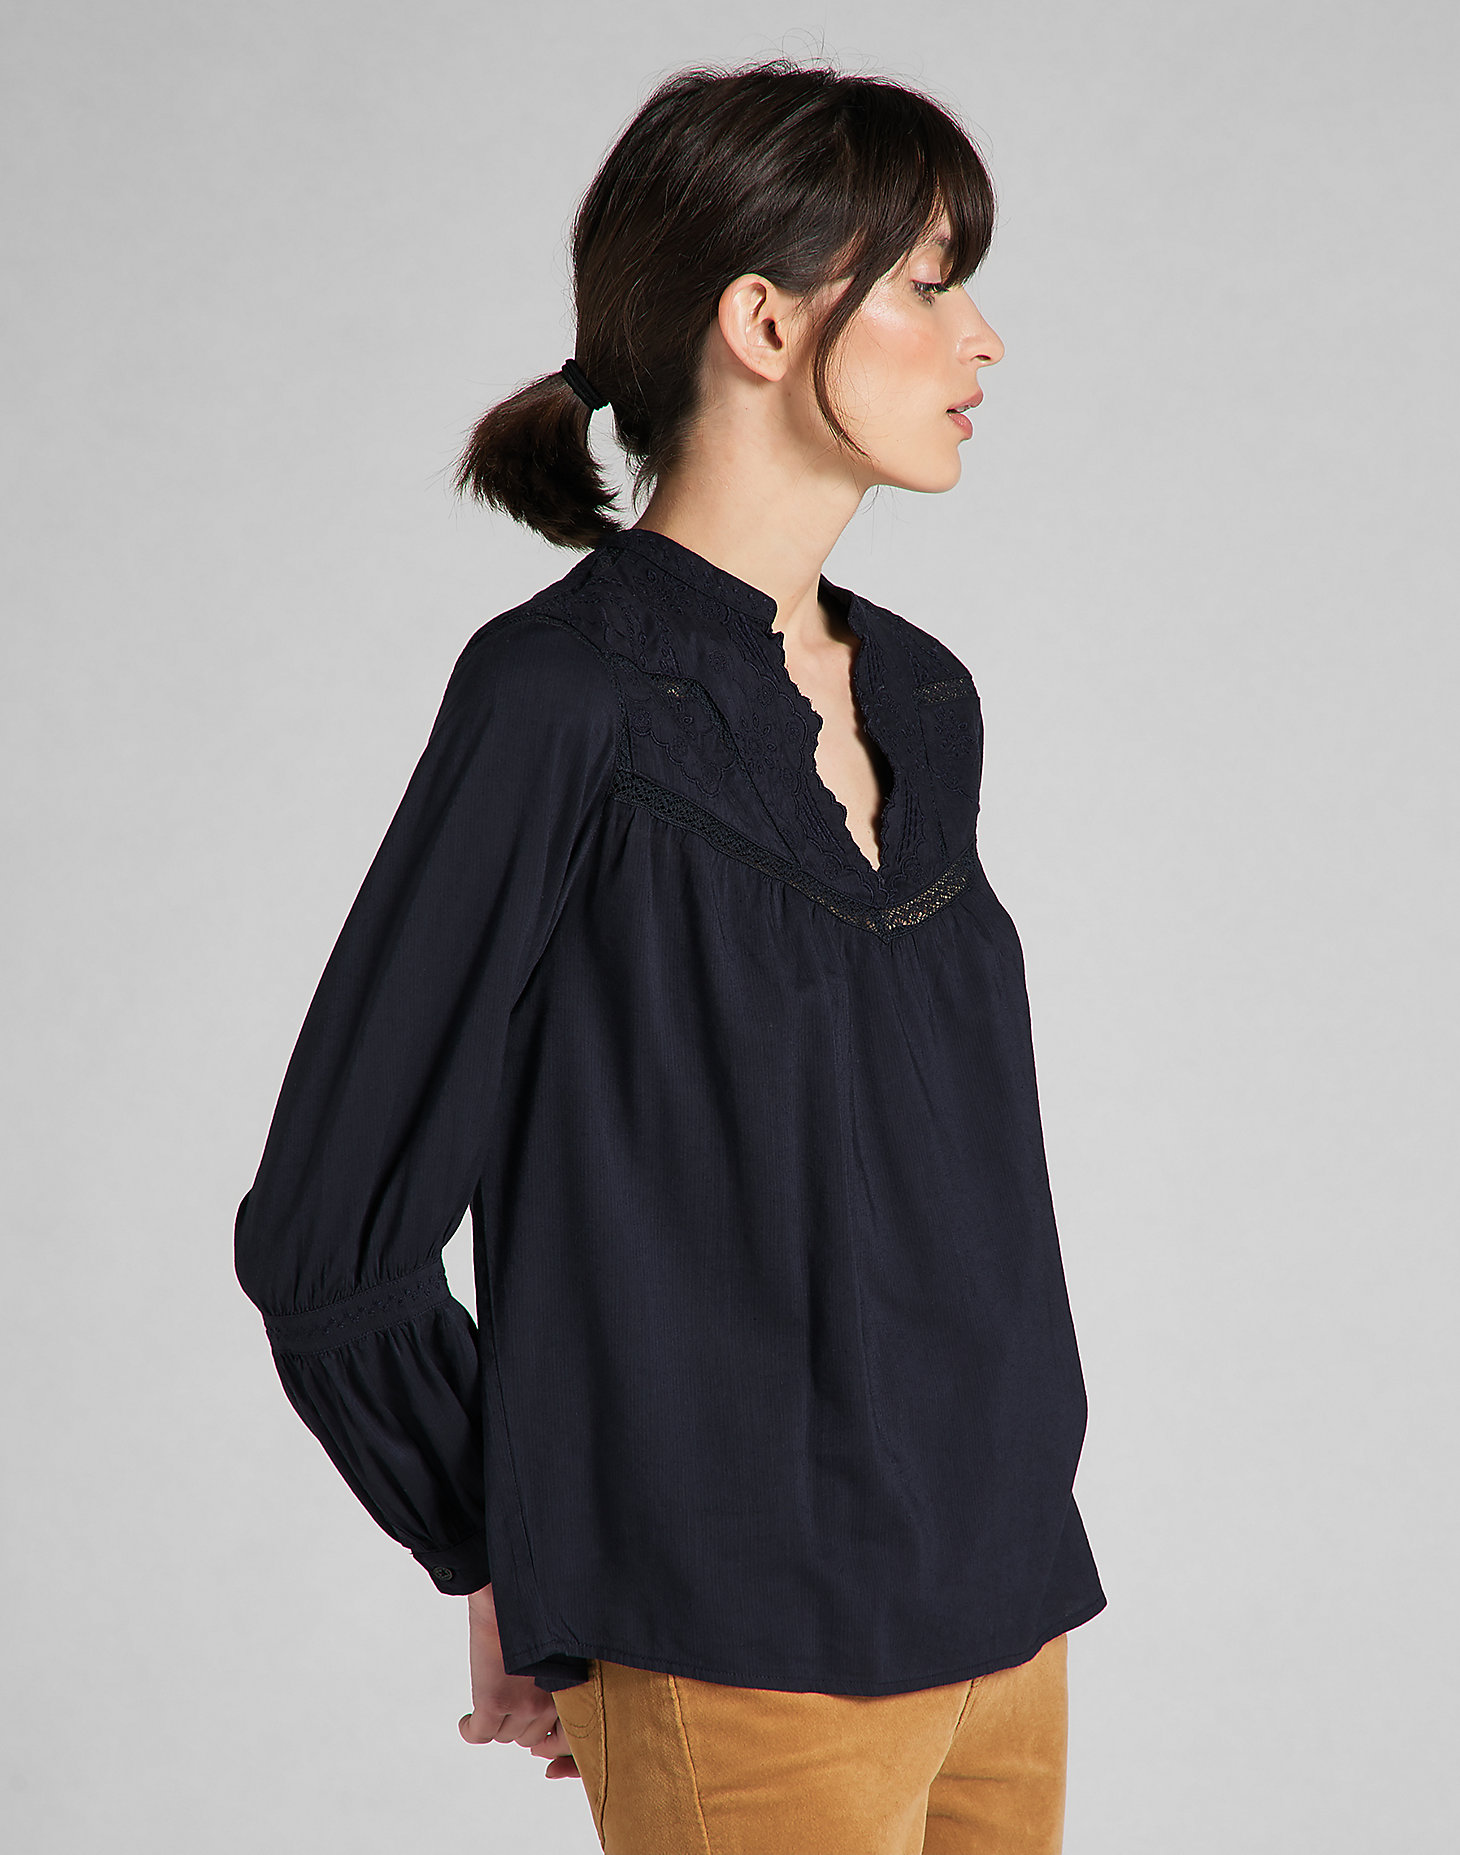 Floaty Blouse in Sky Captain alternative view 3